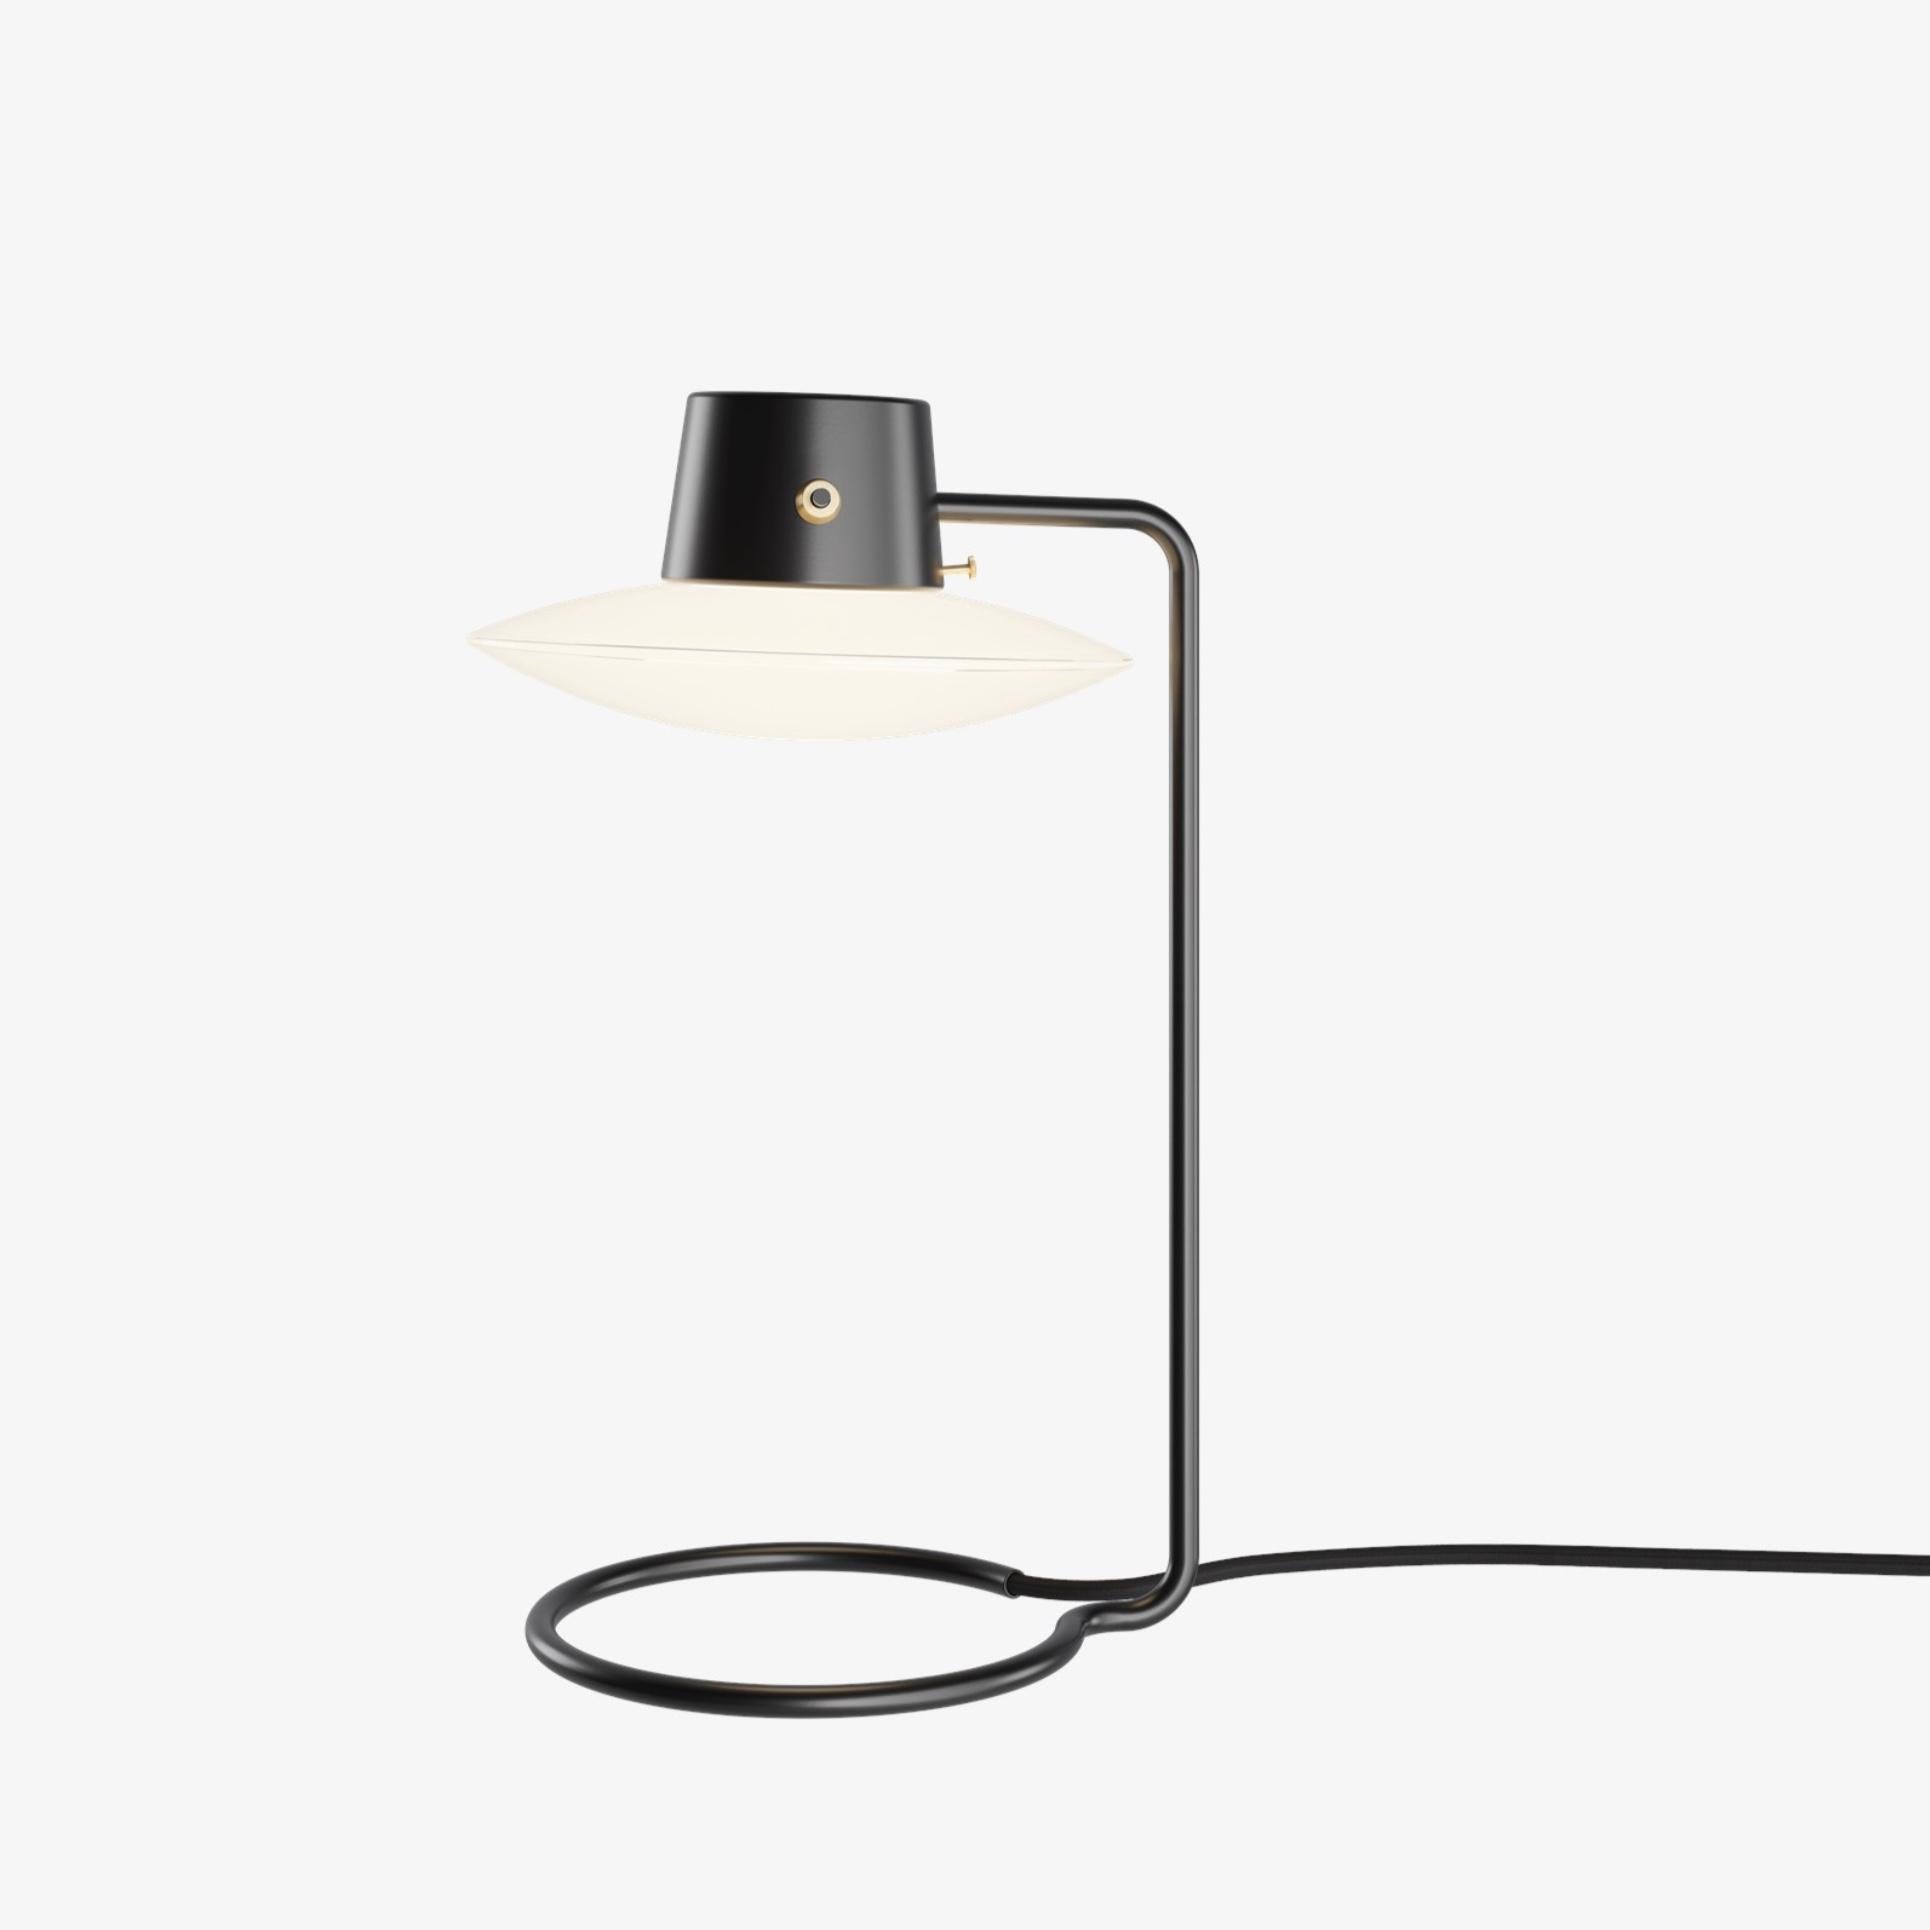 Arne Jacobsen AJ Oxford Table Lamp 410mm in black and opaline for Louis Poulsen. Designed in 1963, current production.

The AJ Oxford Table Lamp has a sleek graphic expression, which reflects the architecture of St Catherine's College, in Oxford,